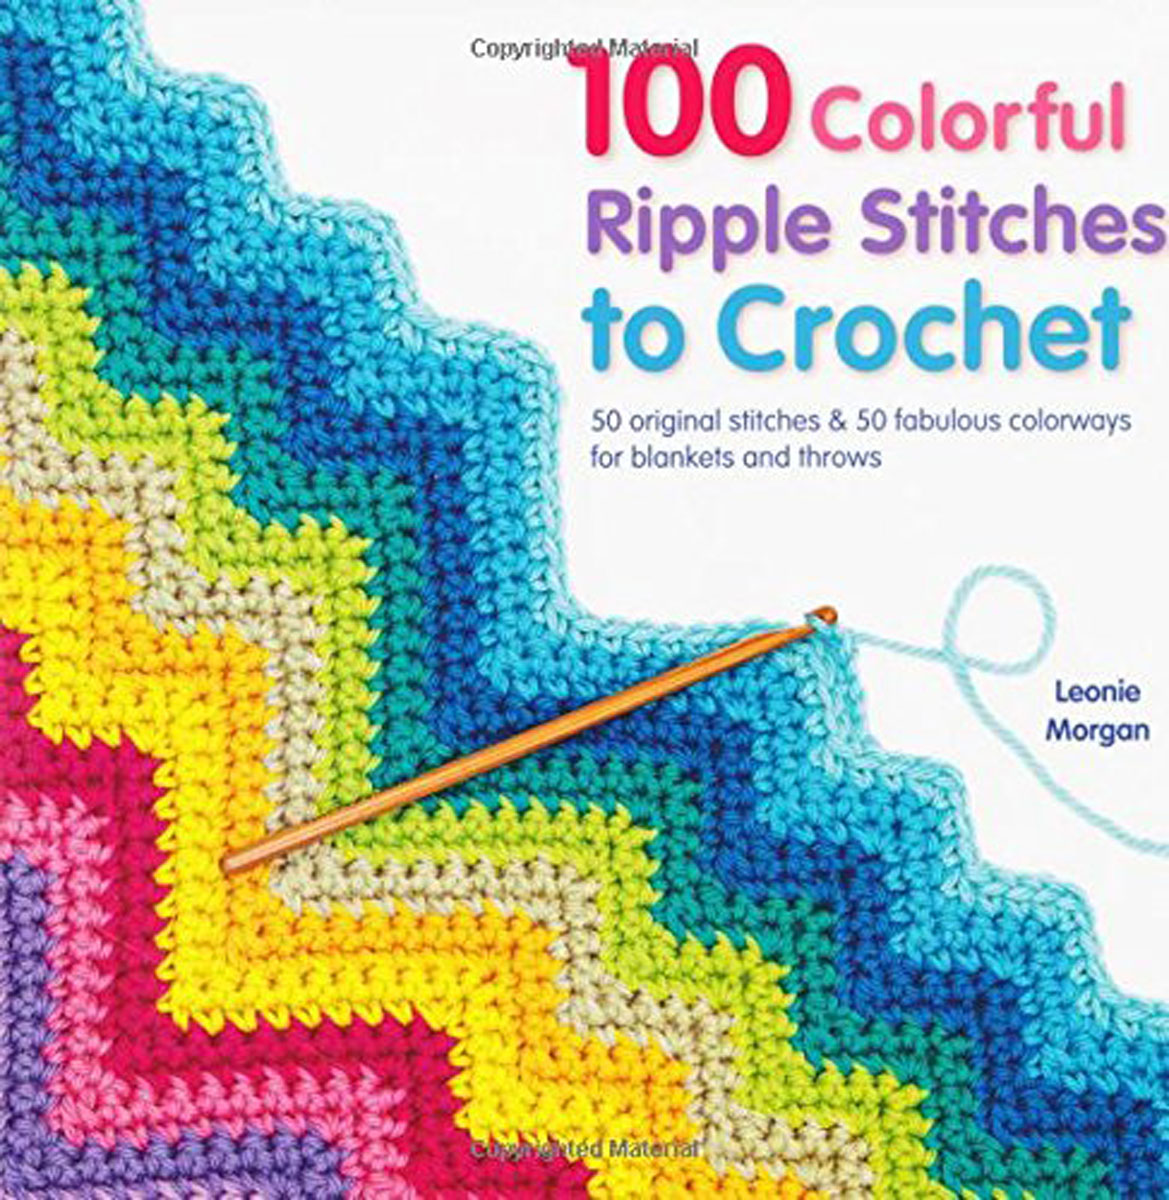 100 Colorful Ripple Stitches to Crochet: 50 Original Stitches & 50 Fabulous Colorways for Blankets and Throws